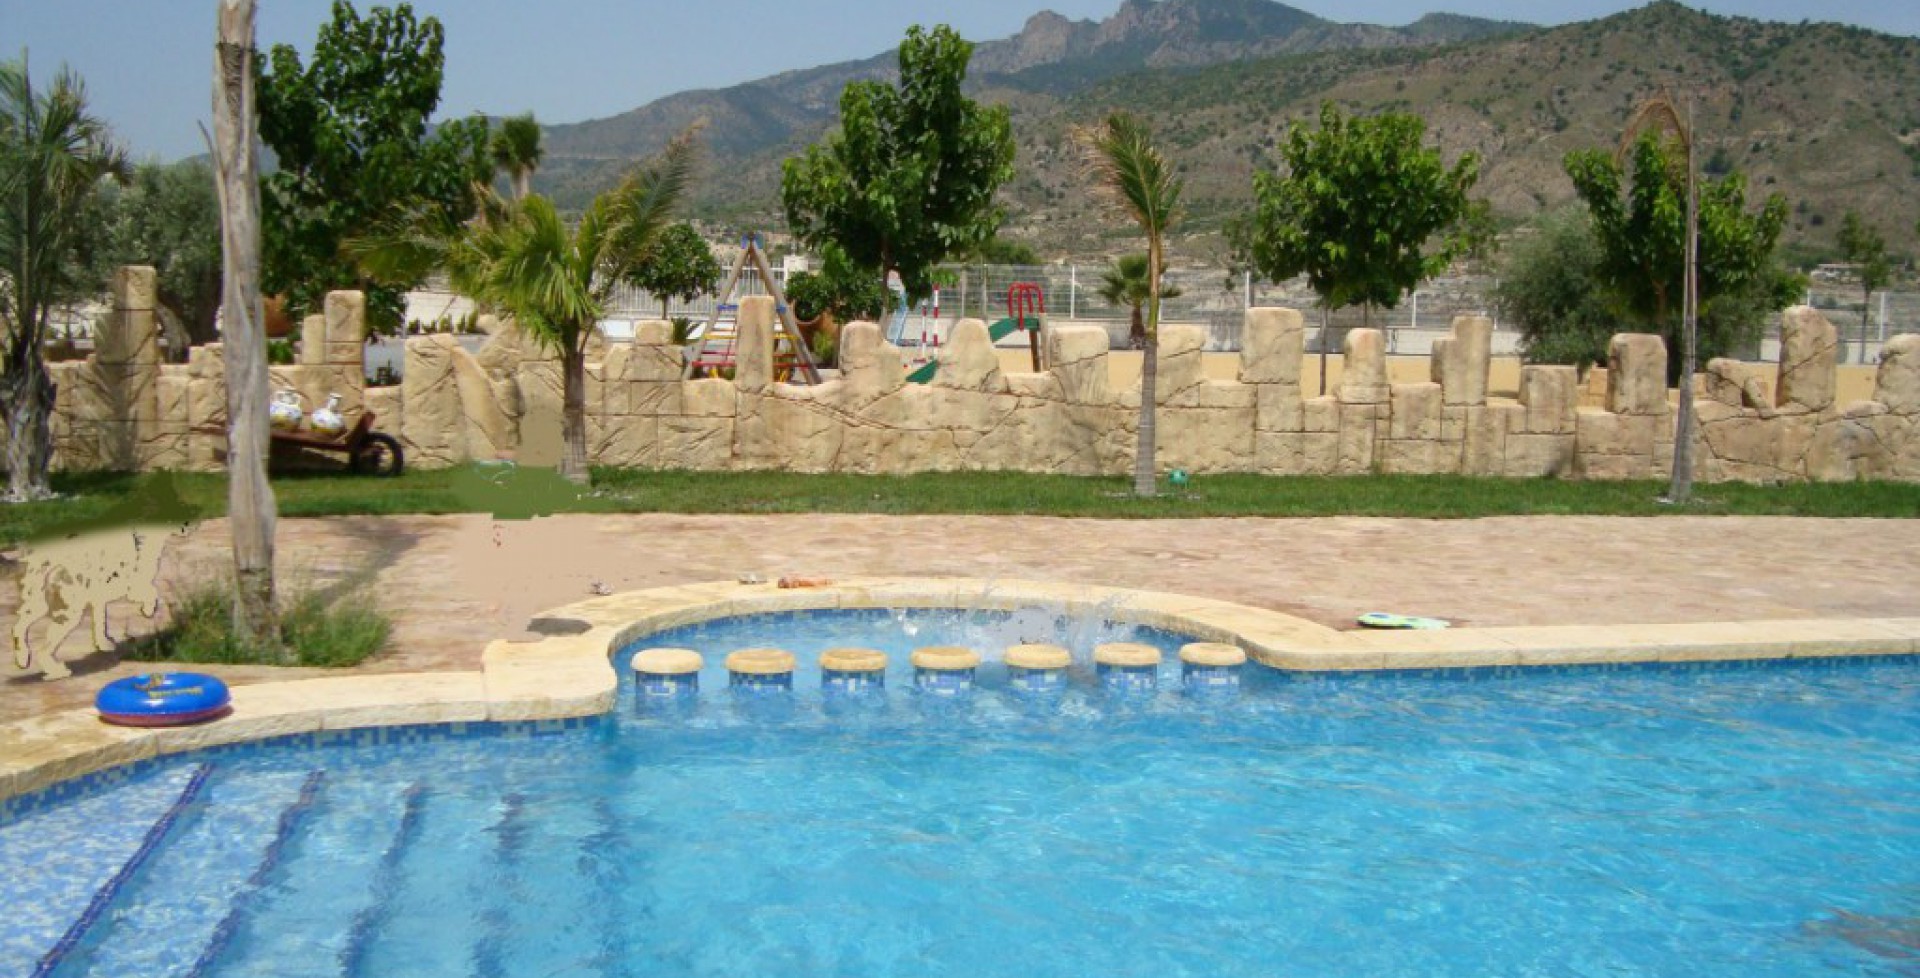 Beautiful swimming pool at country home, Ojós, Murcia, Spain